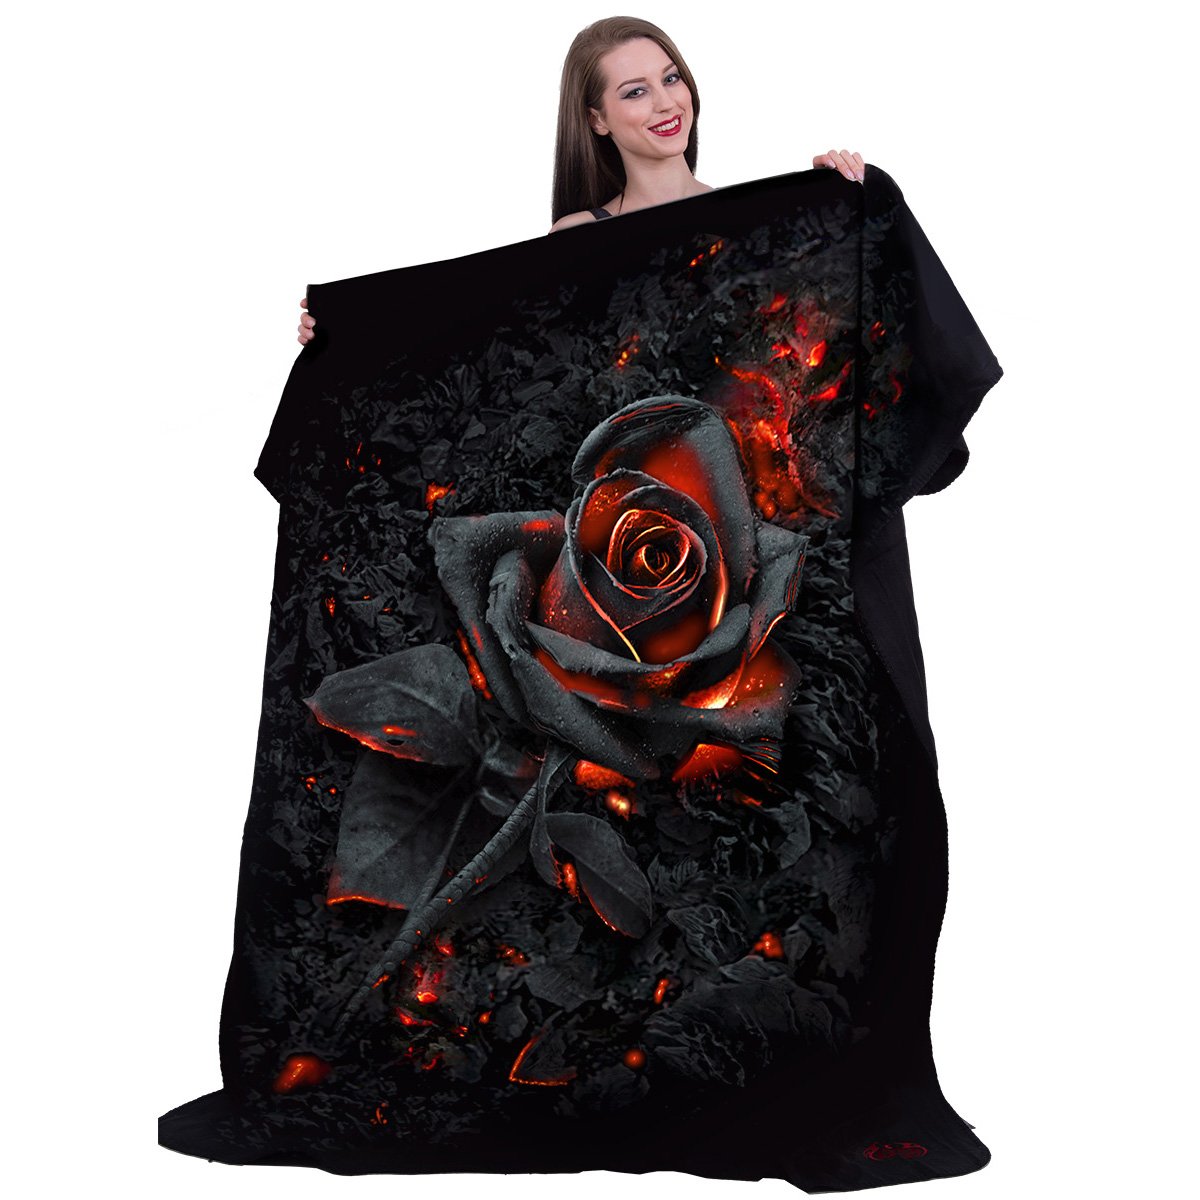 BURNT ROSE - Fleece Blanket with Double Sided Print - Spiral USA